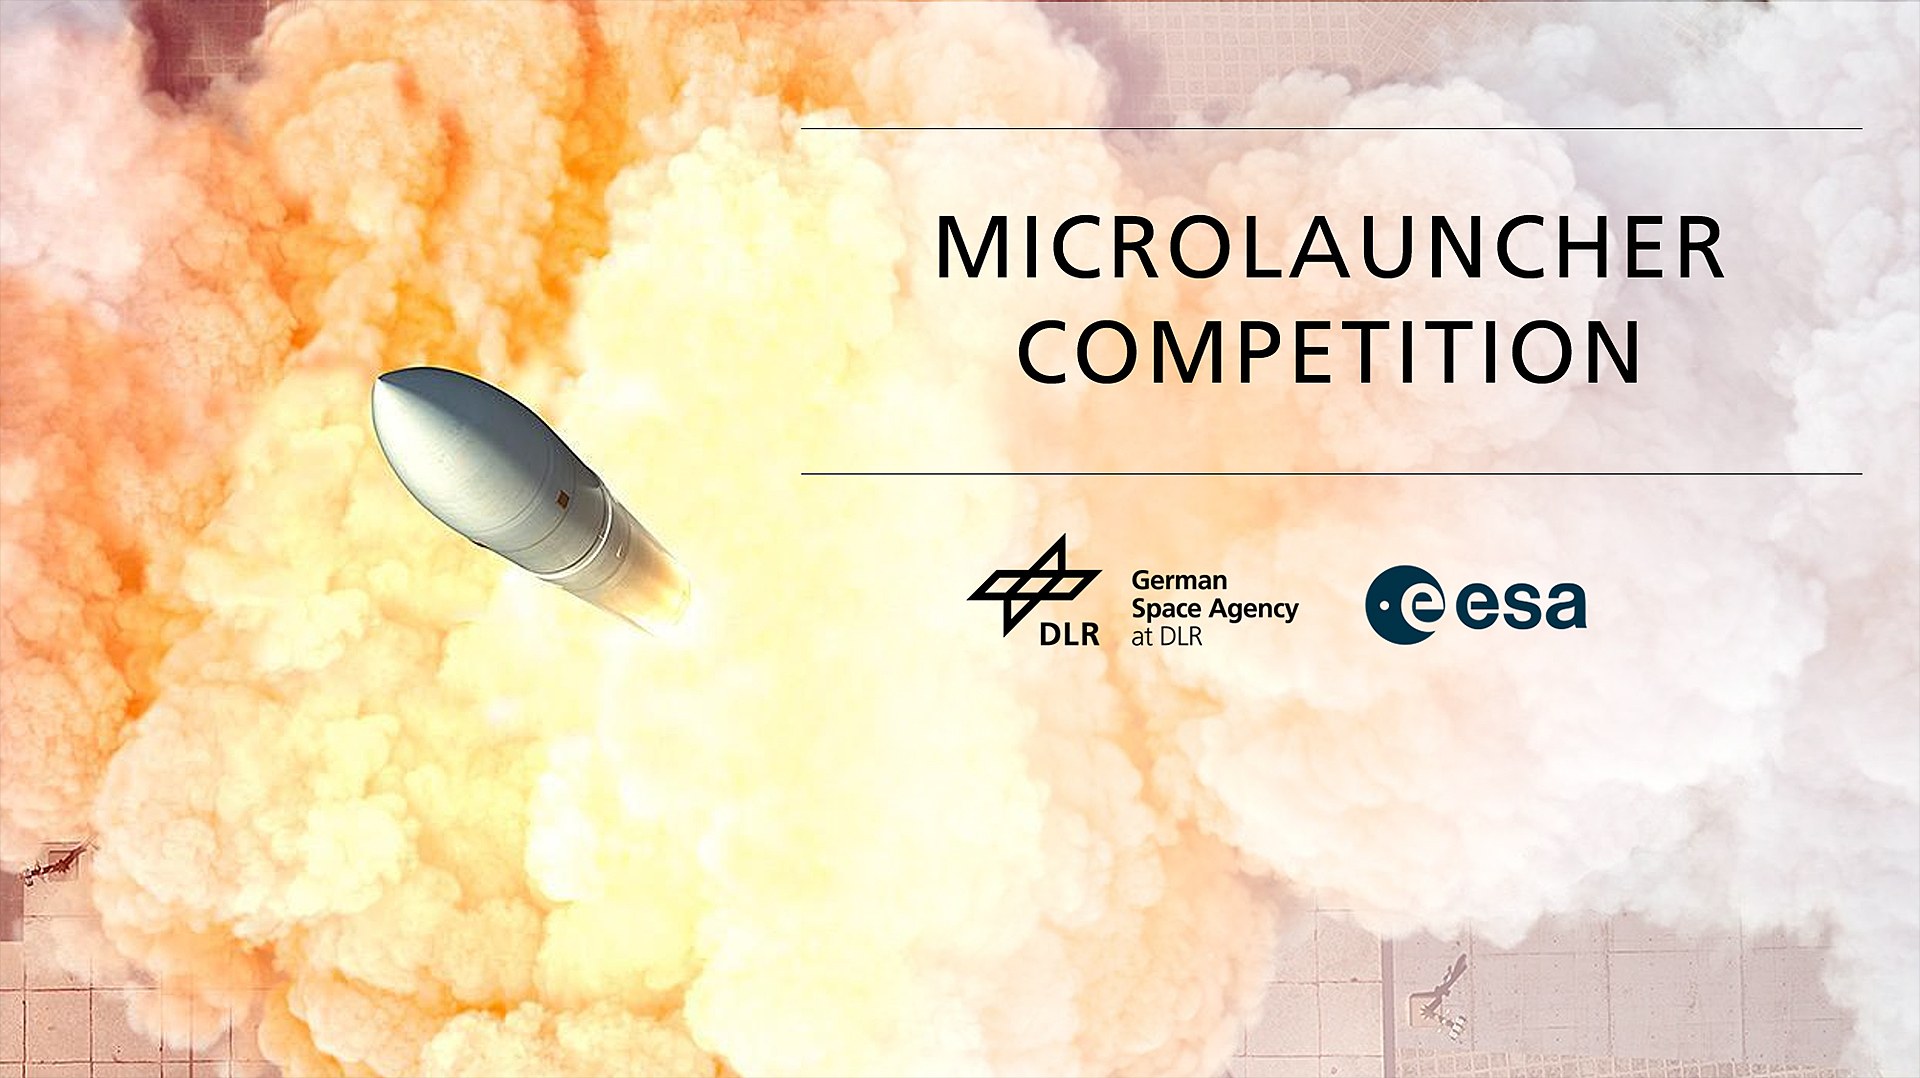 The German Space Agency at DLR microlauncher competition